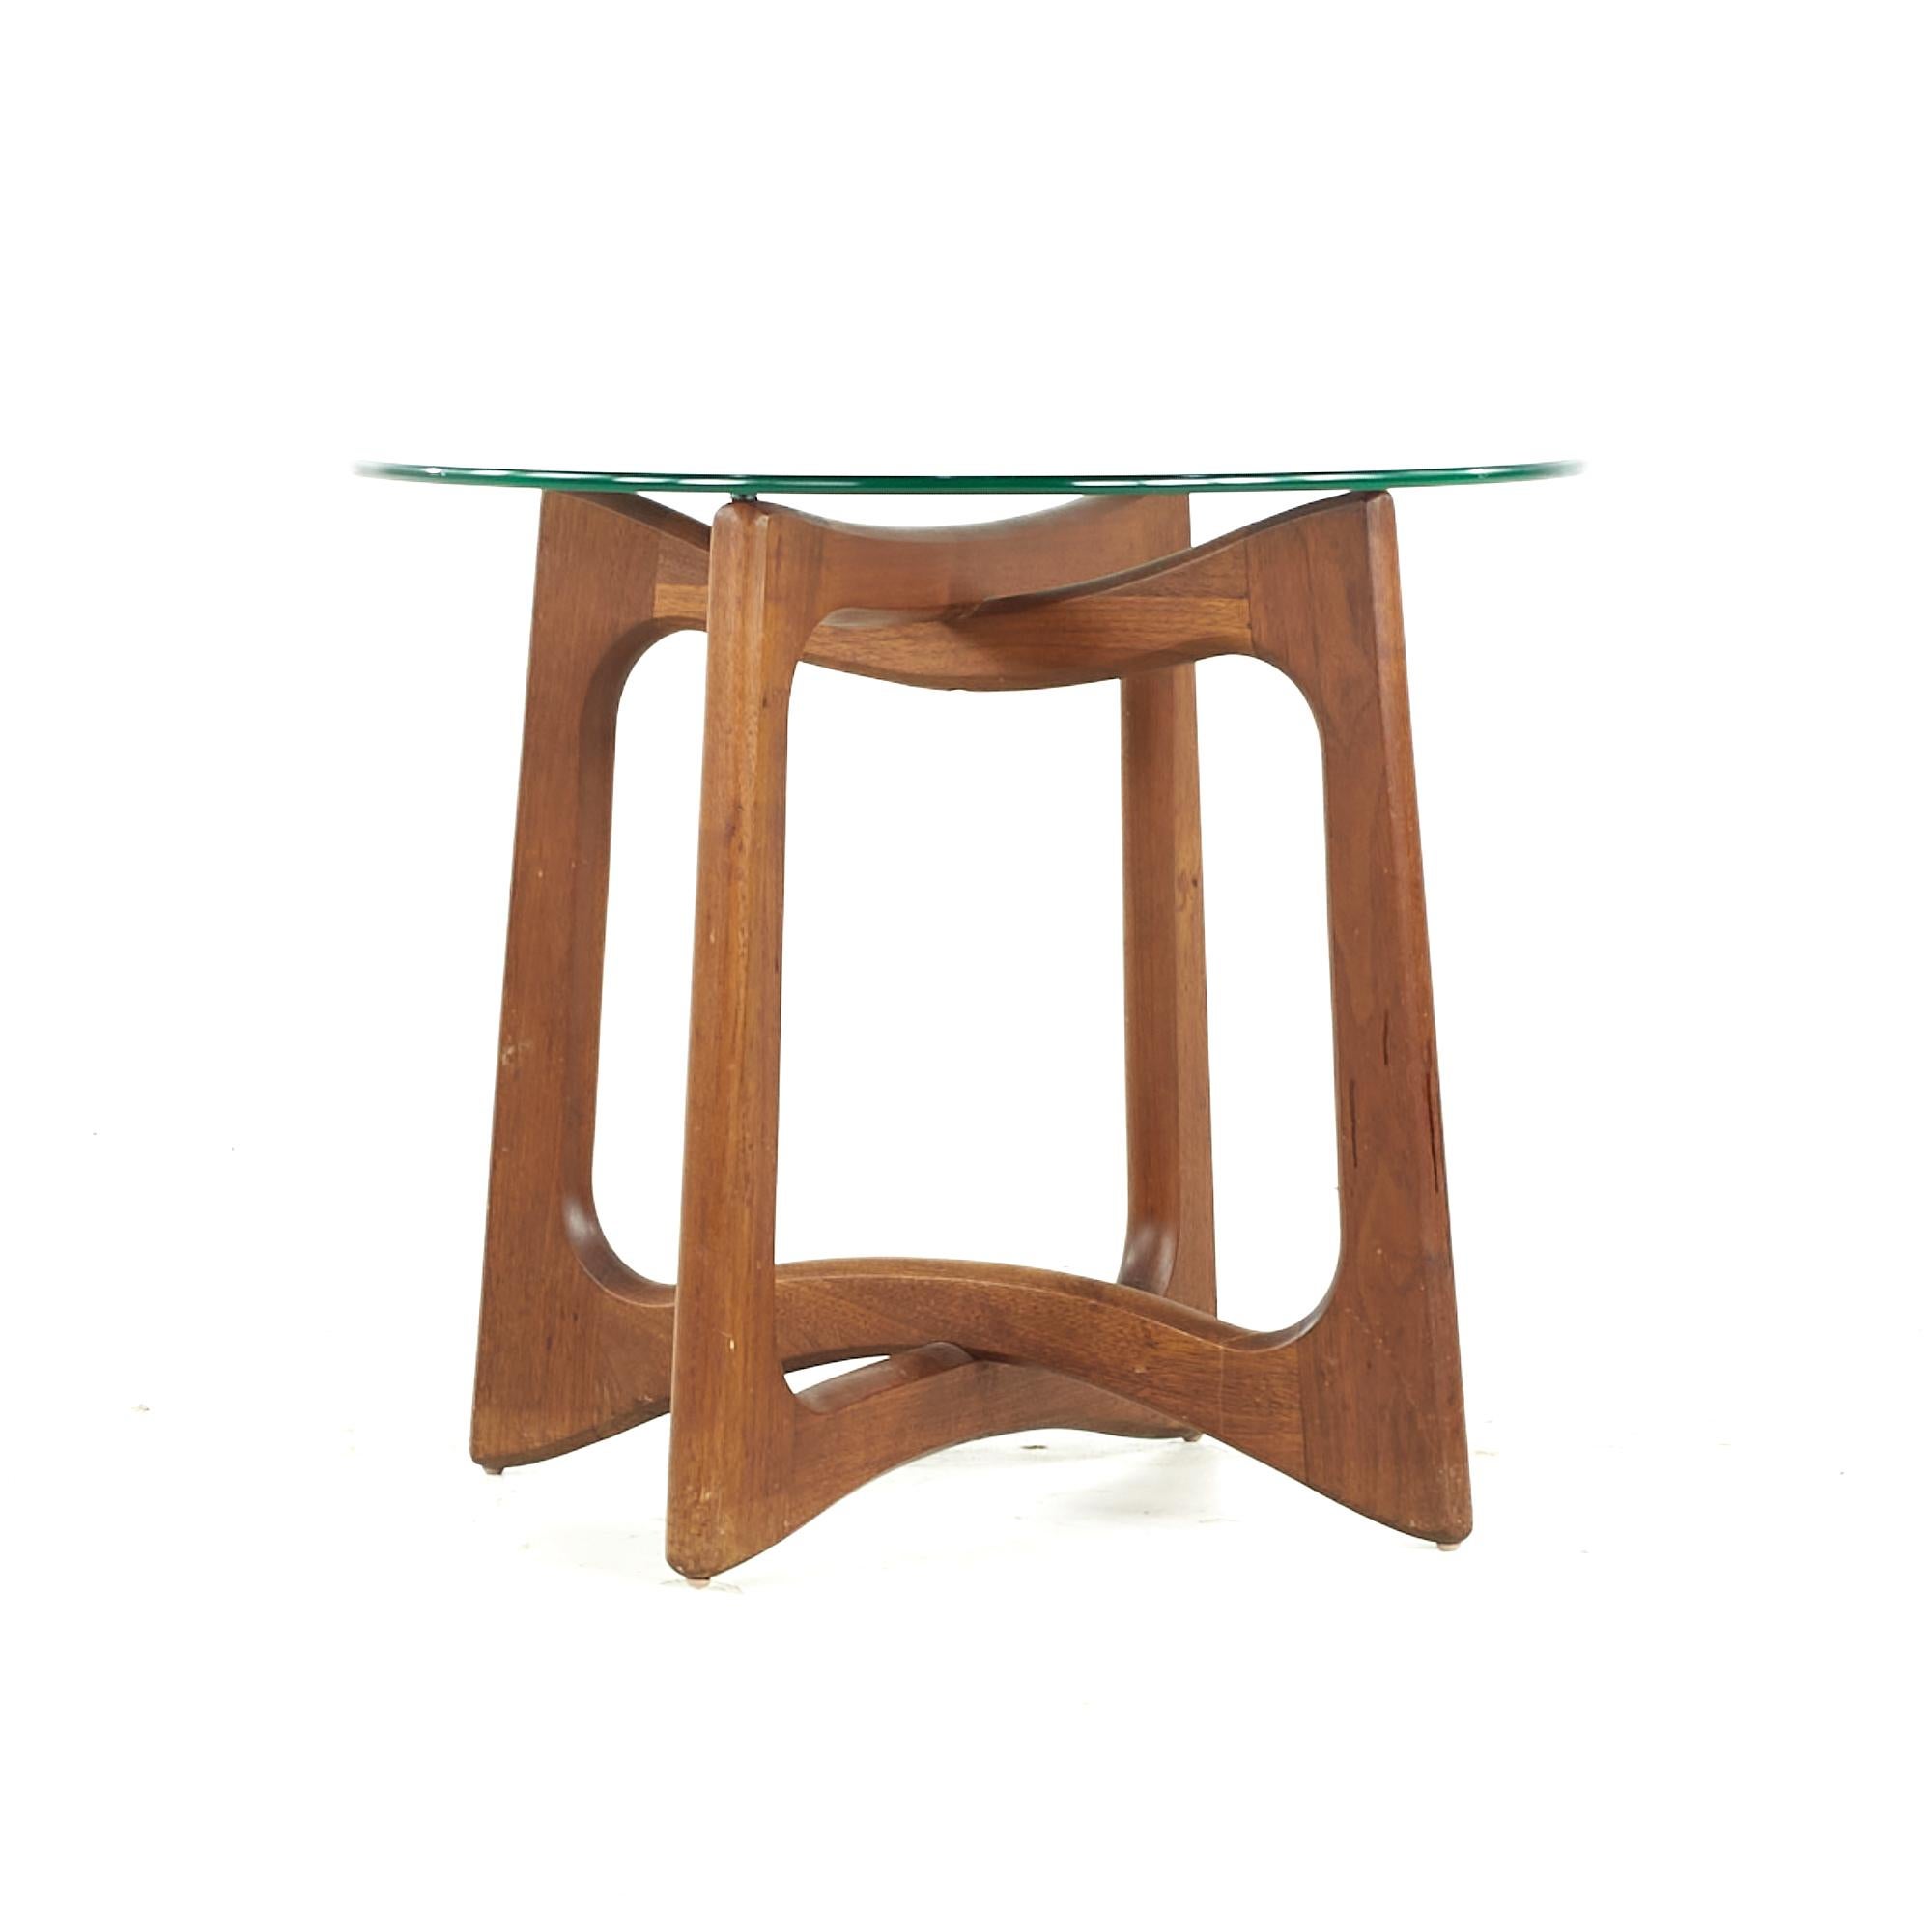 Adrian Pearsall Midcentury Walnut and Glass Side Tables, Pair In Good Condition For Sale In Countryside, IL